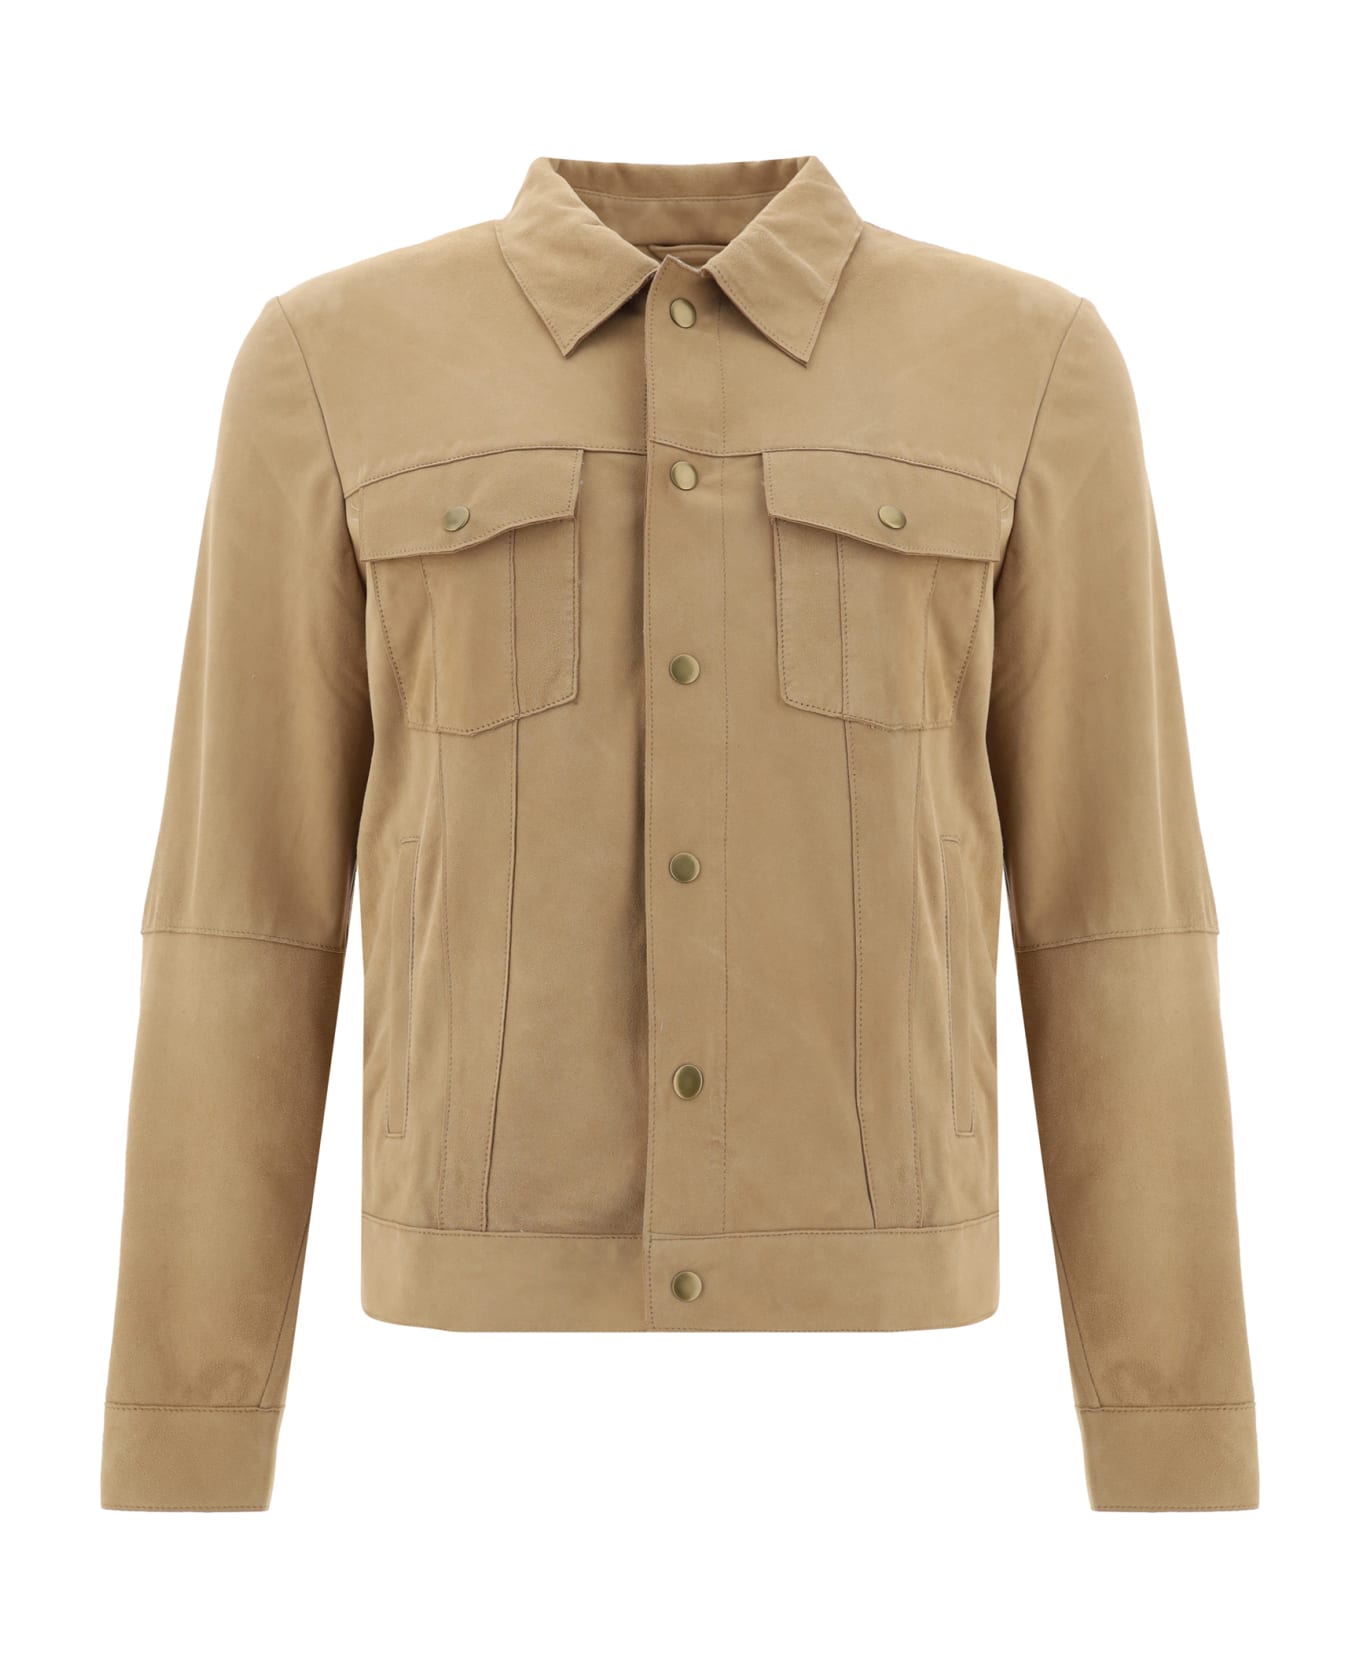 D'Amico Leather Jacket - Suede Beach Beige ジャケット